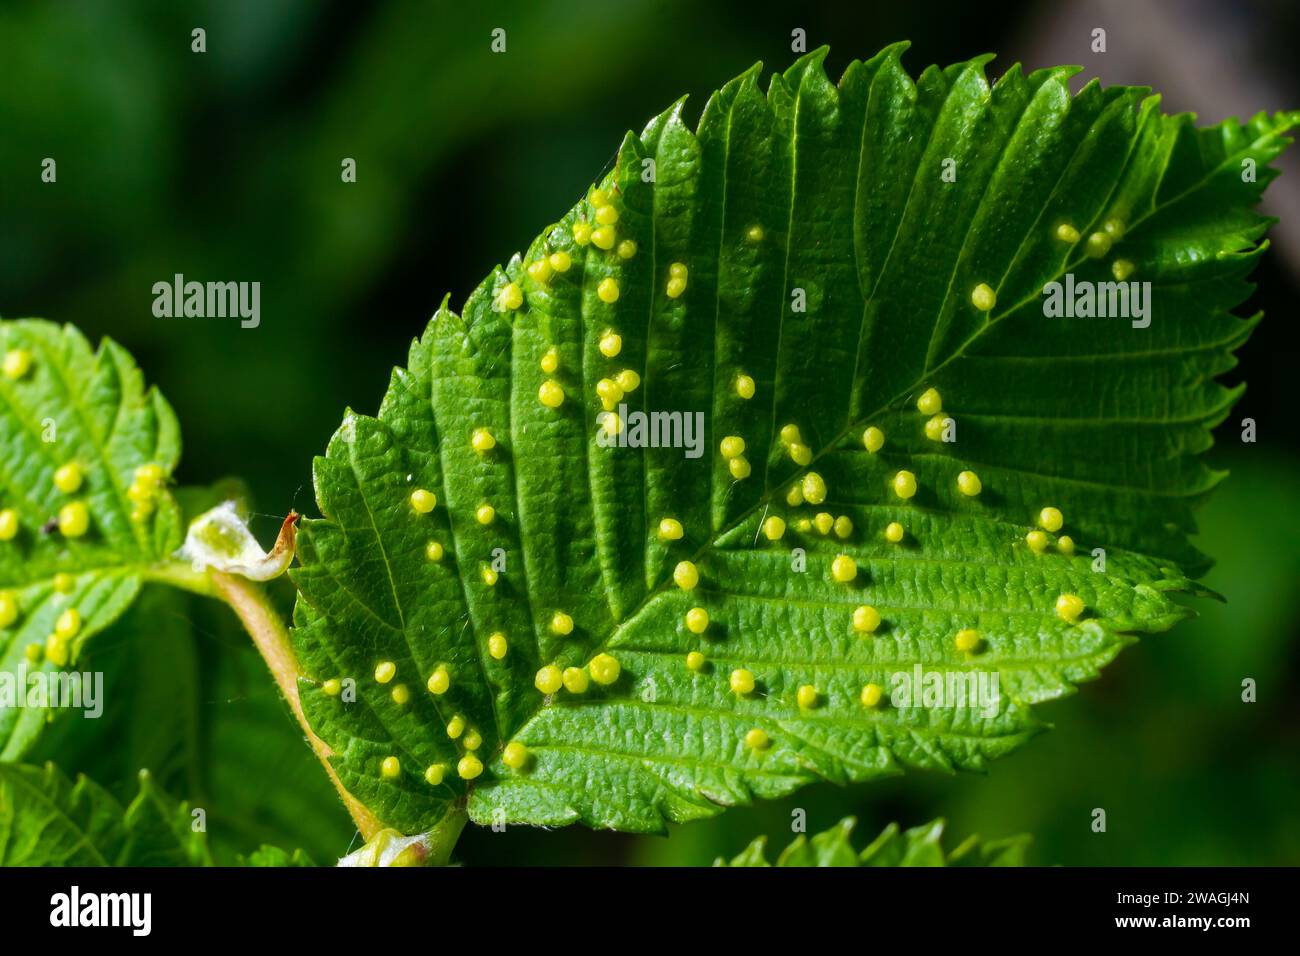 Leaves with gall mite Eriophyes tiliae. A close-up photograph of a leaf affected by galls of Eriophyes tiliae. High quality photo Stock Photo